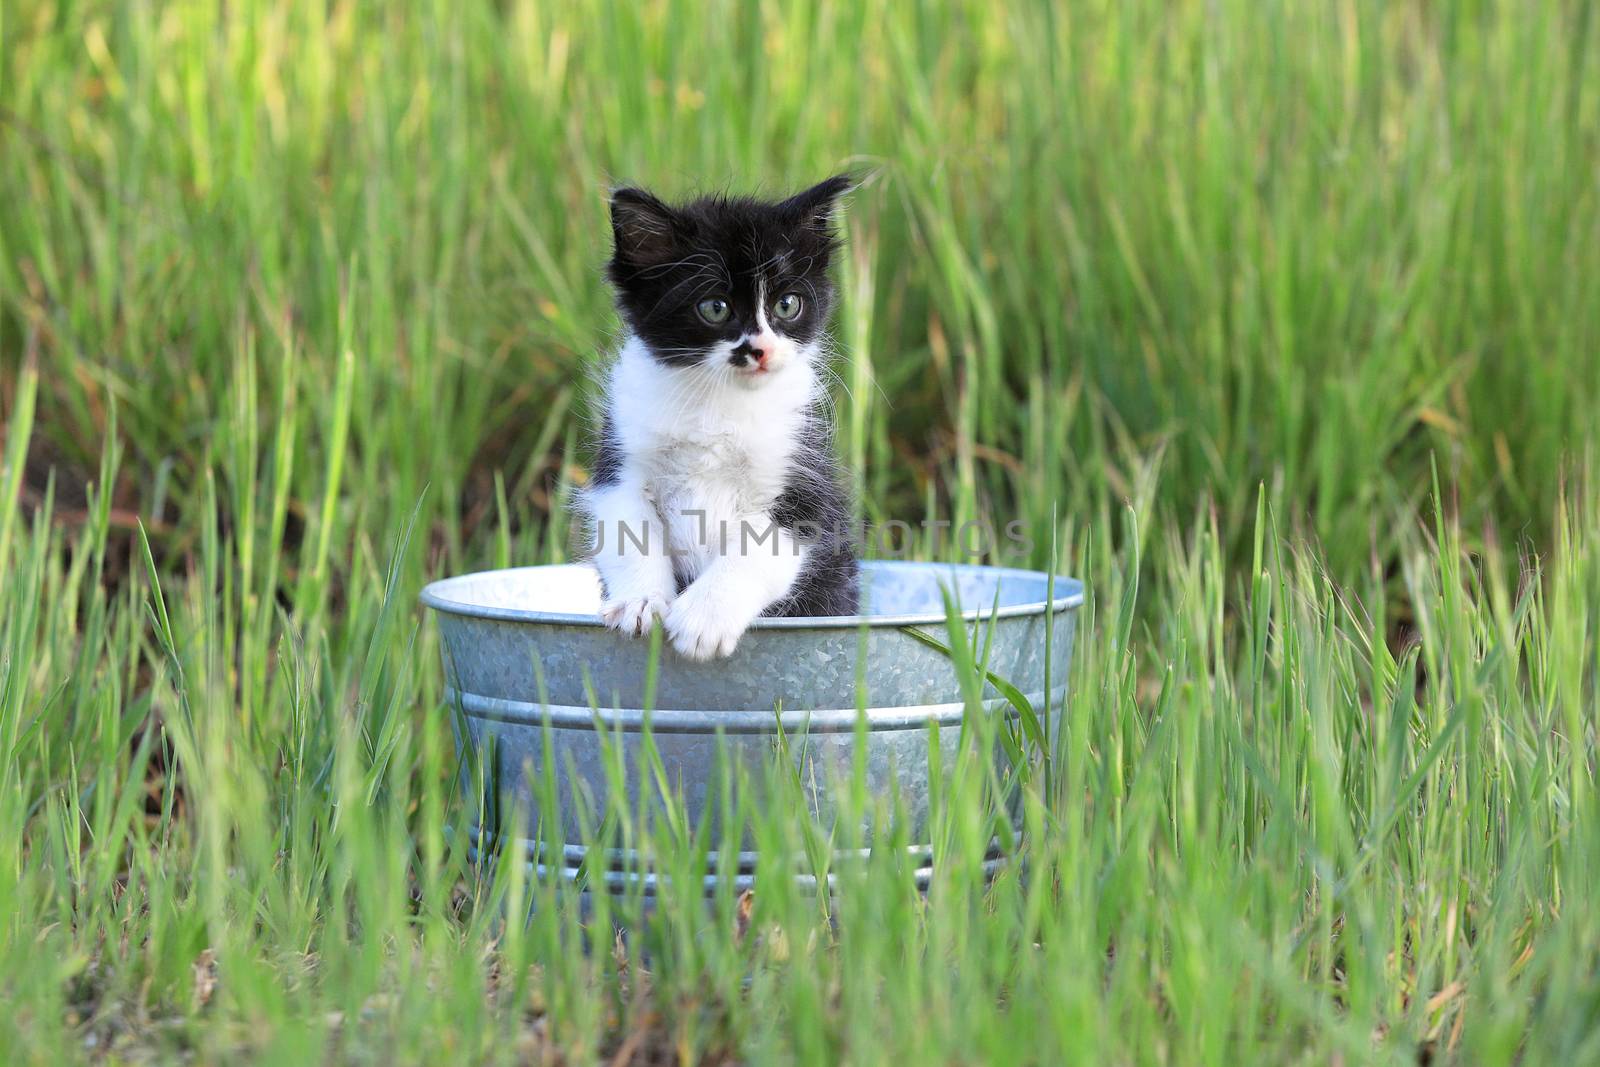 Kitten Outdoors in Green Tall Grass on a Sunny Day by tobkatrina